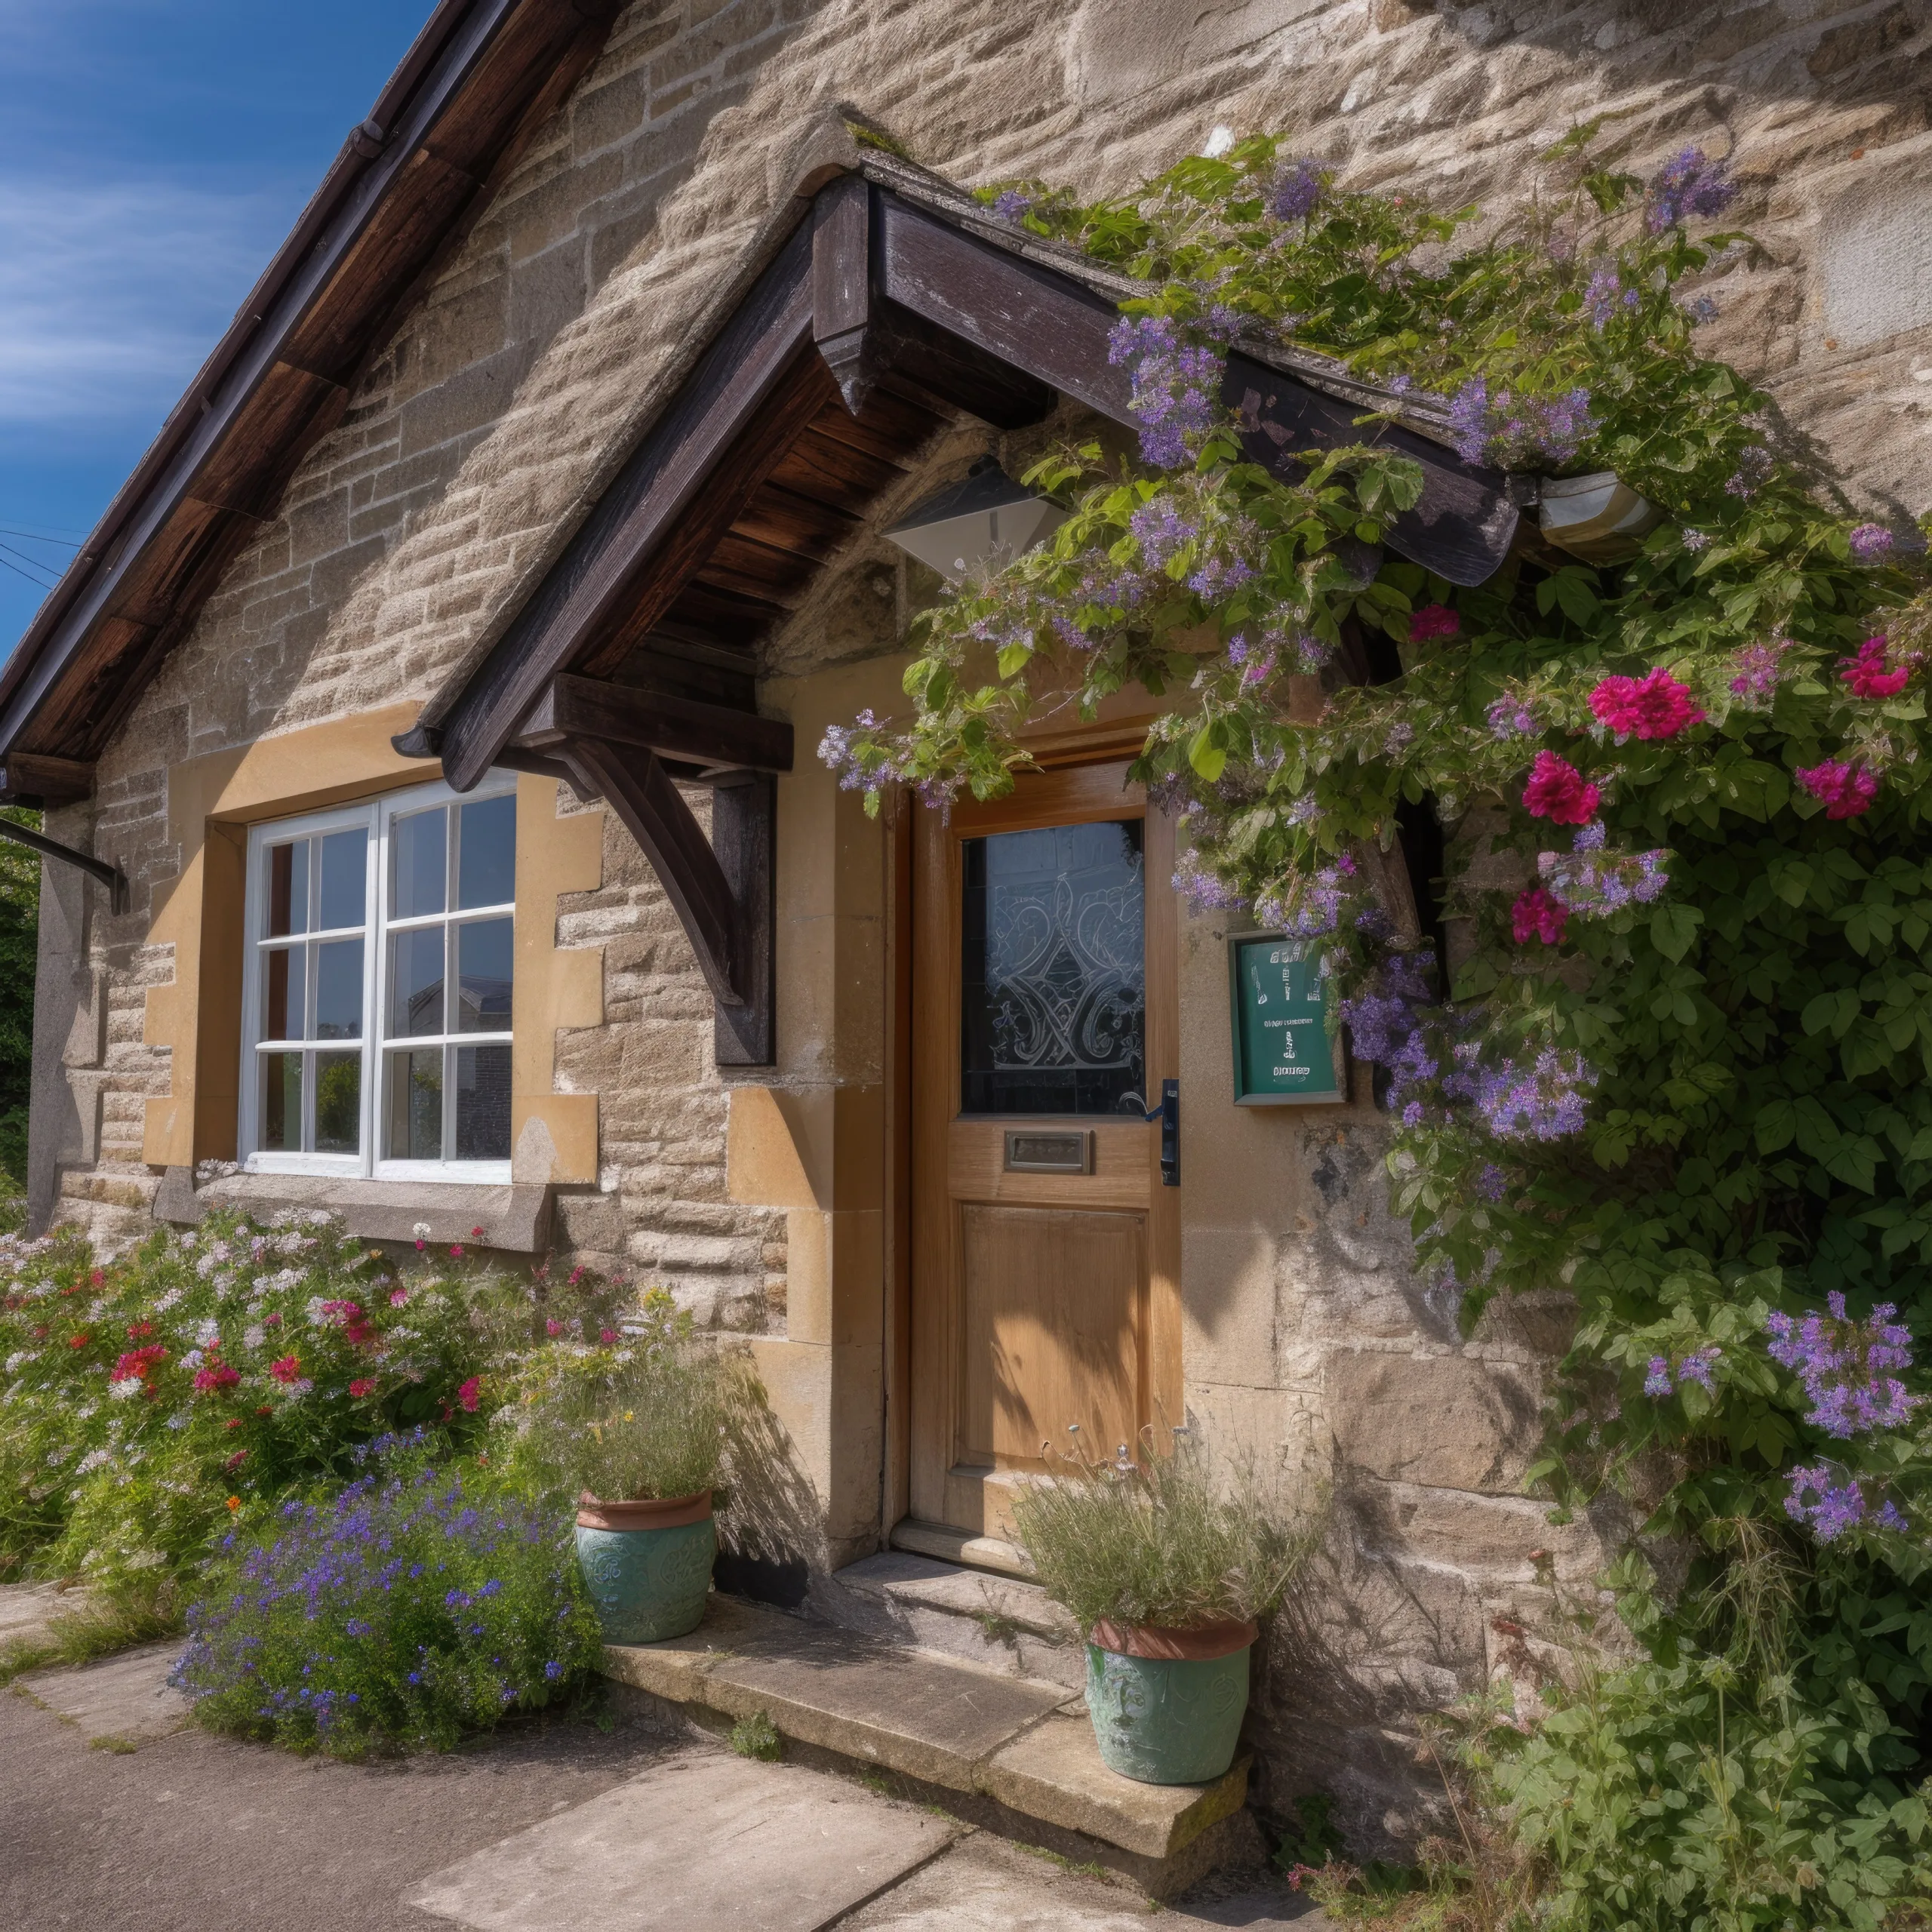 Village halls for your Wedding Day: a stone building with a wooden door and window.